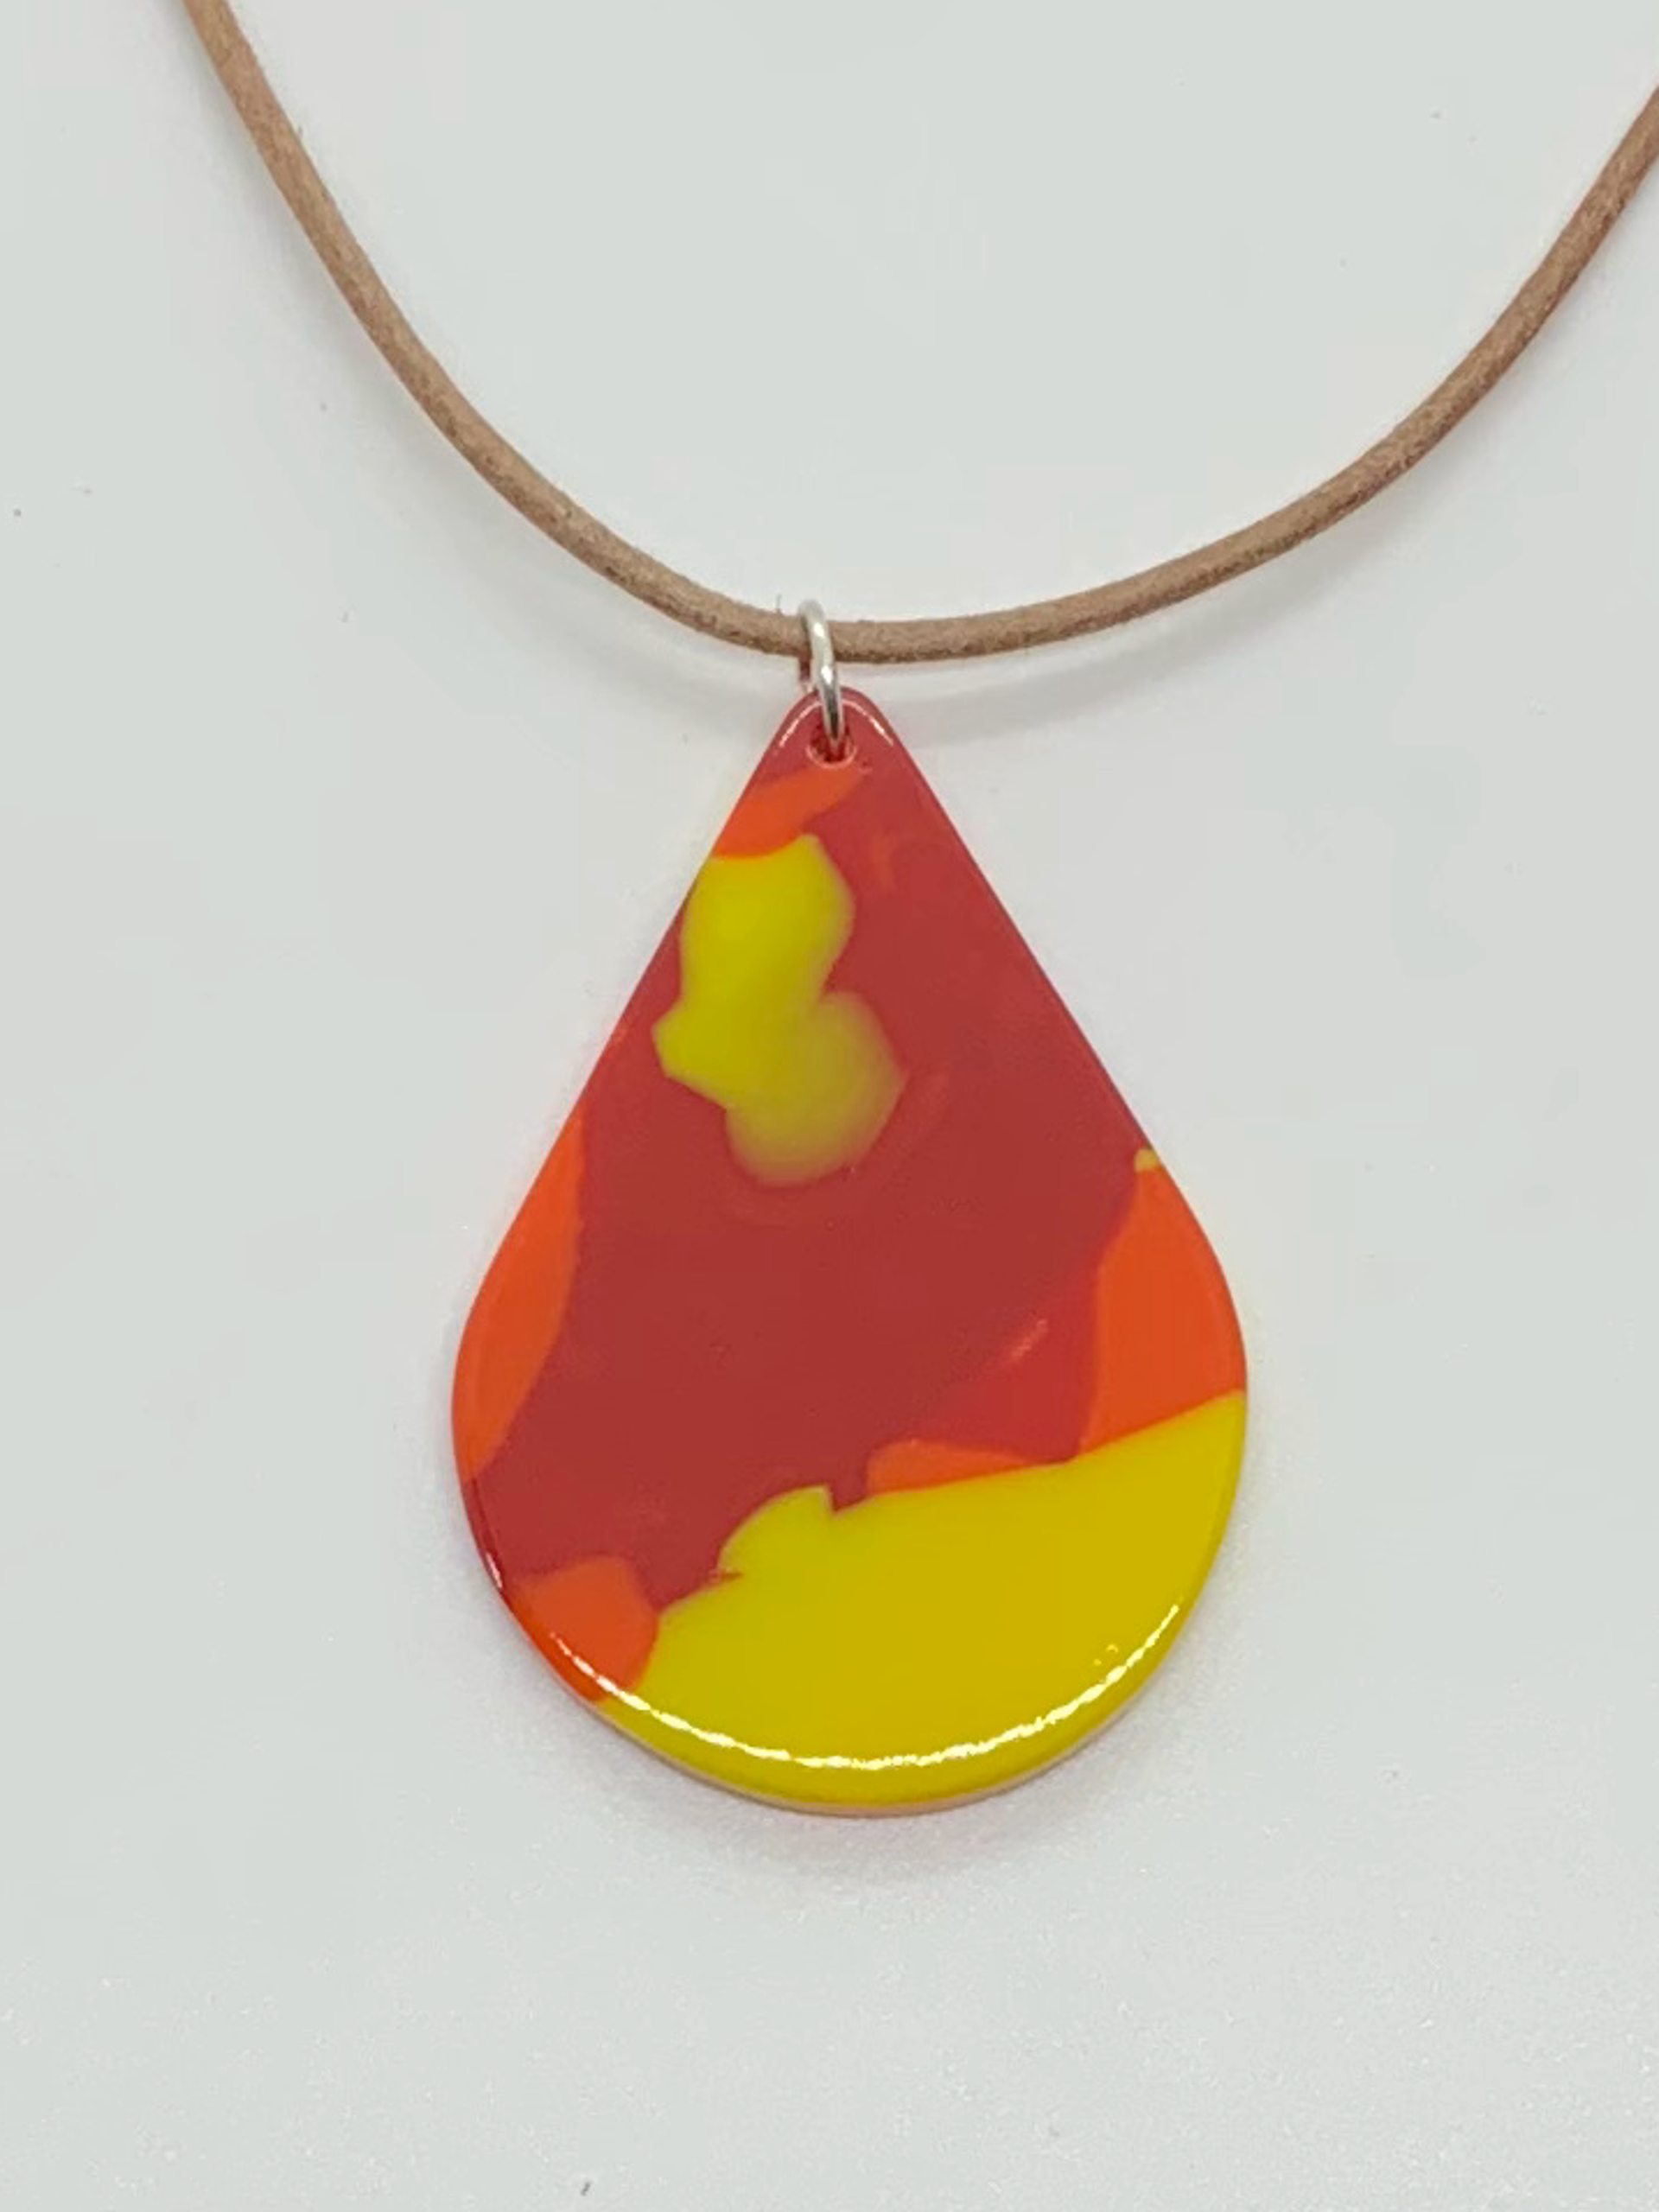 Molten Glass Necklace Teardrop - Red, Yellow, Orange Gloss by Chris Cox